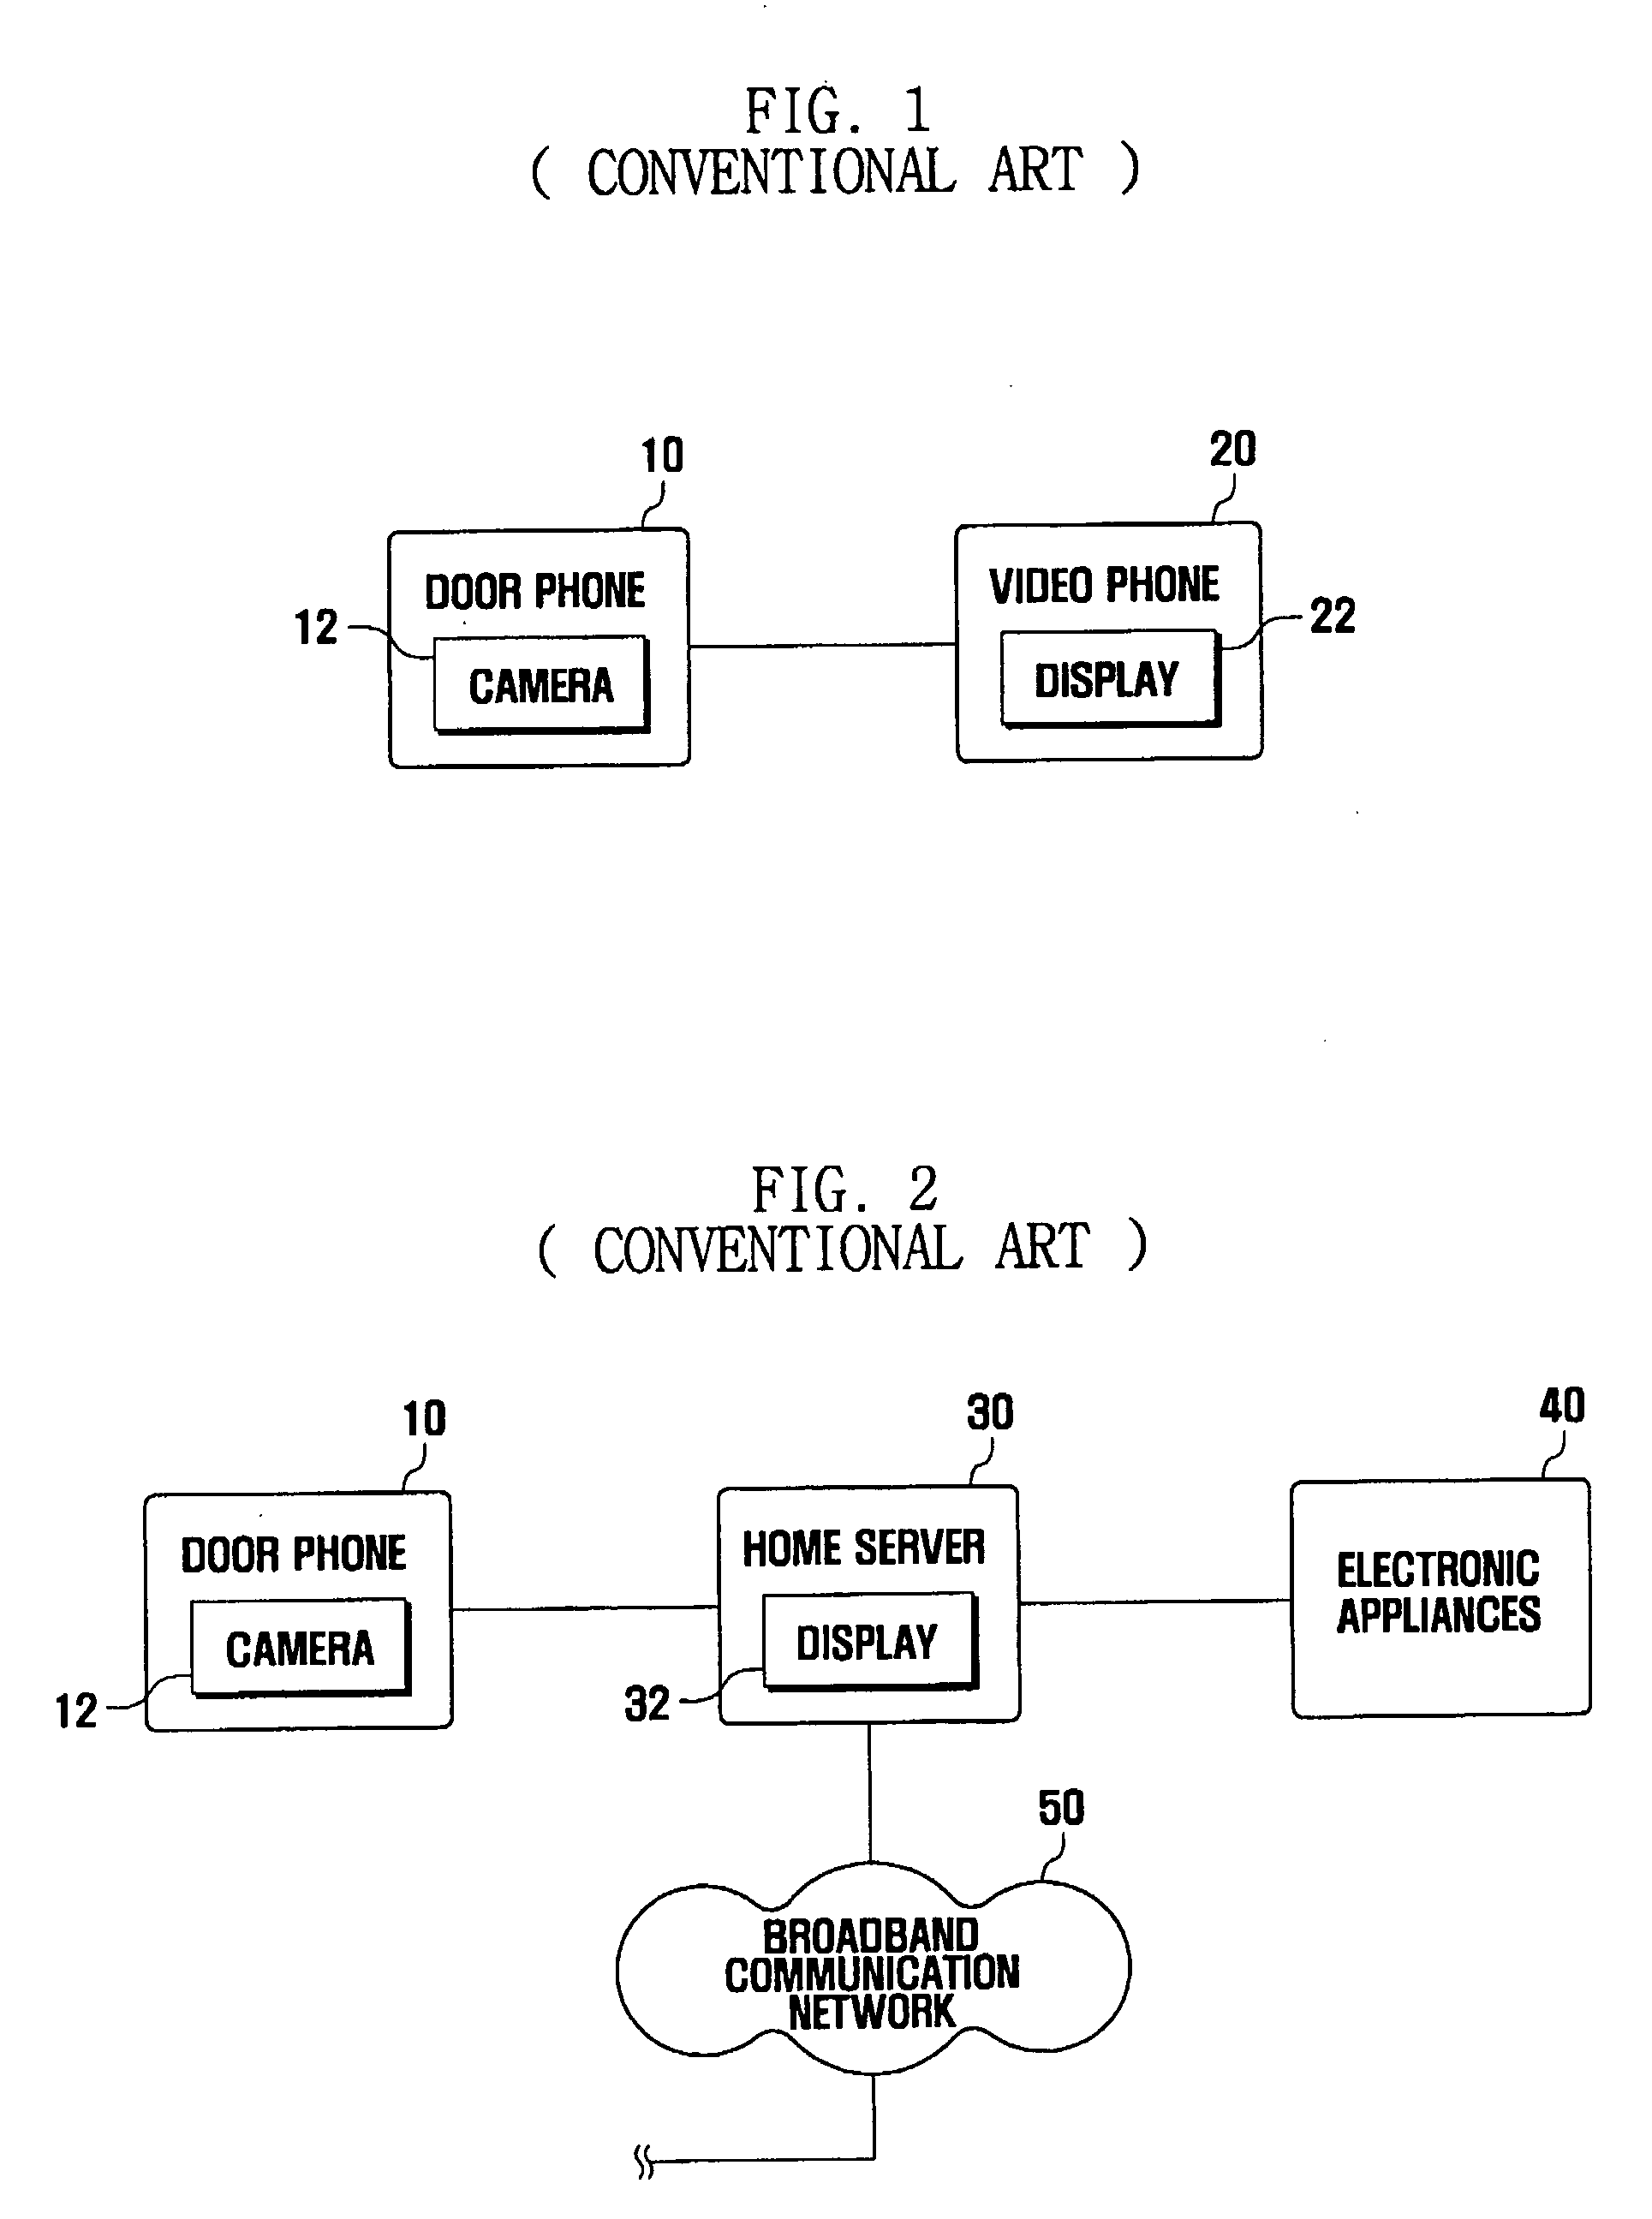 Access authentication system and method using smart communicator